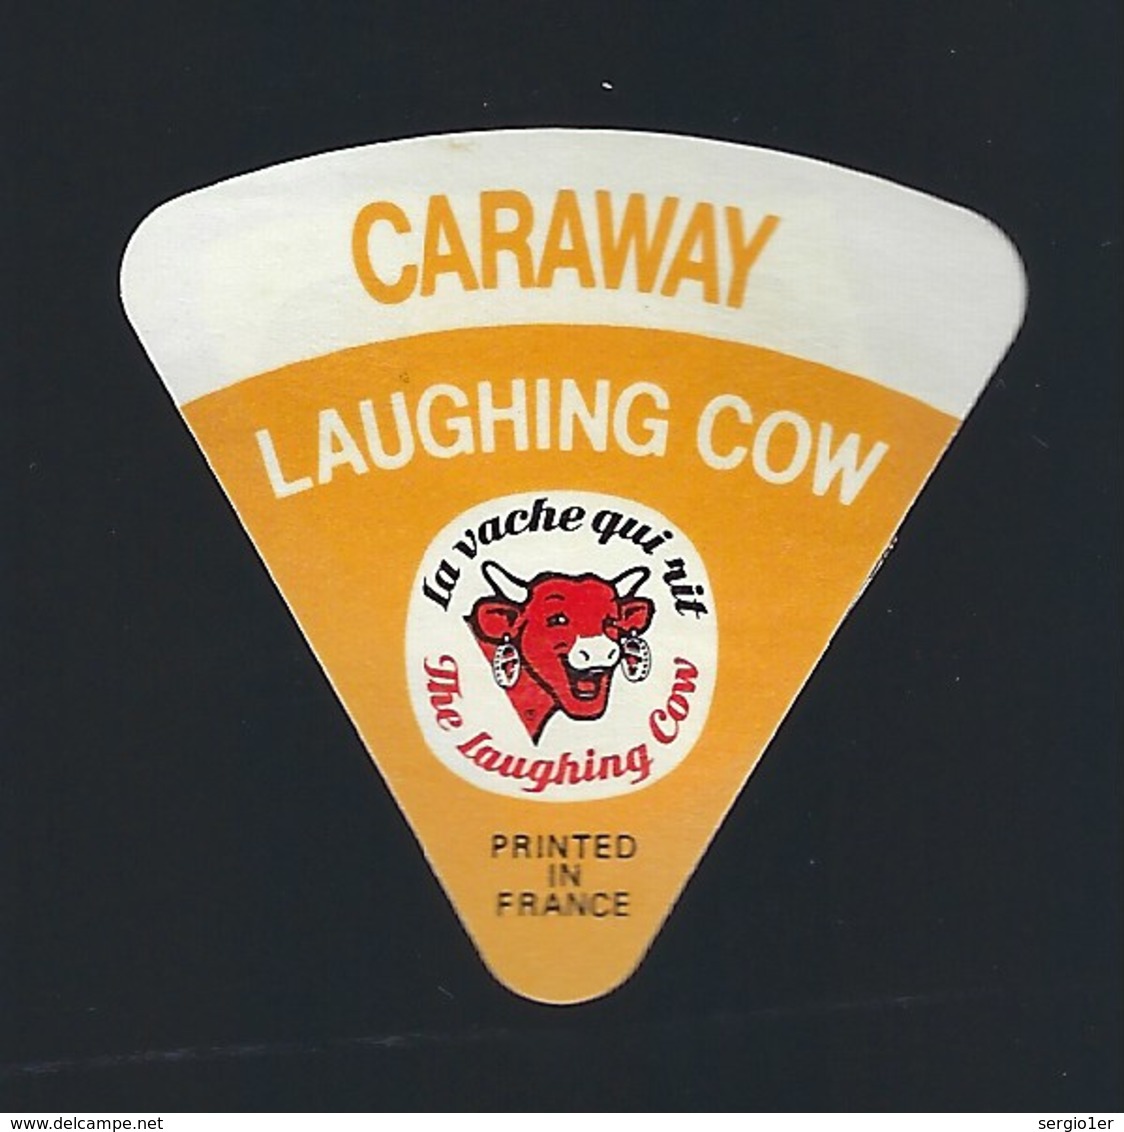 1 étiquette Fromage "portion" La Vache Qui Rit The Laughing Cow Caraway    Printed In France - Fromage